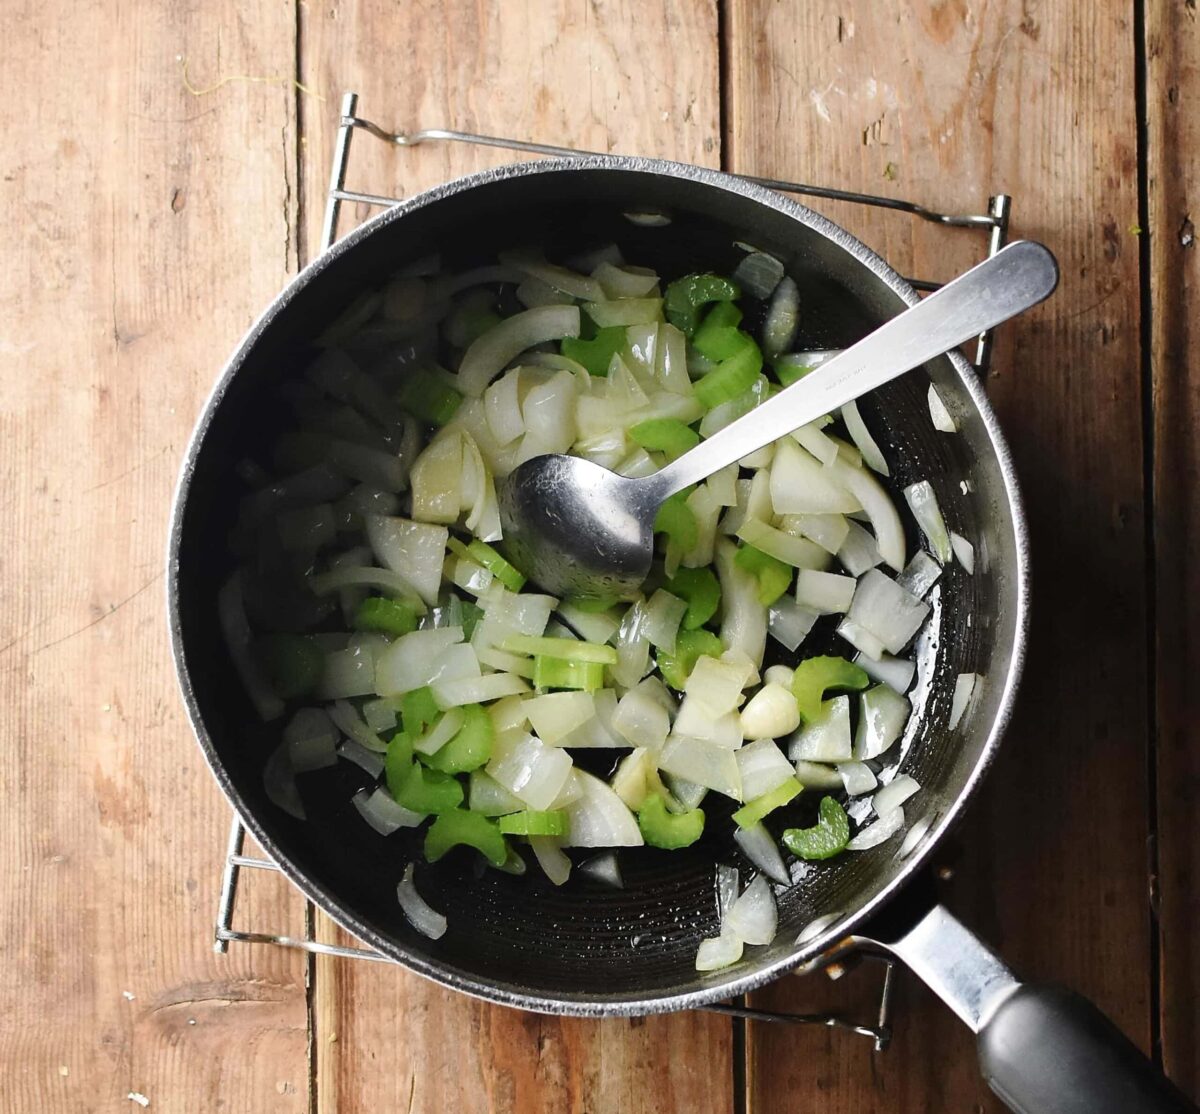 Chopped onions and celery in large pot with spoon.